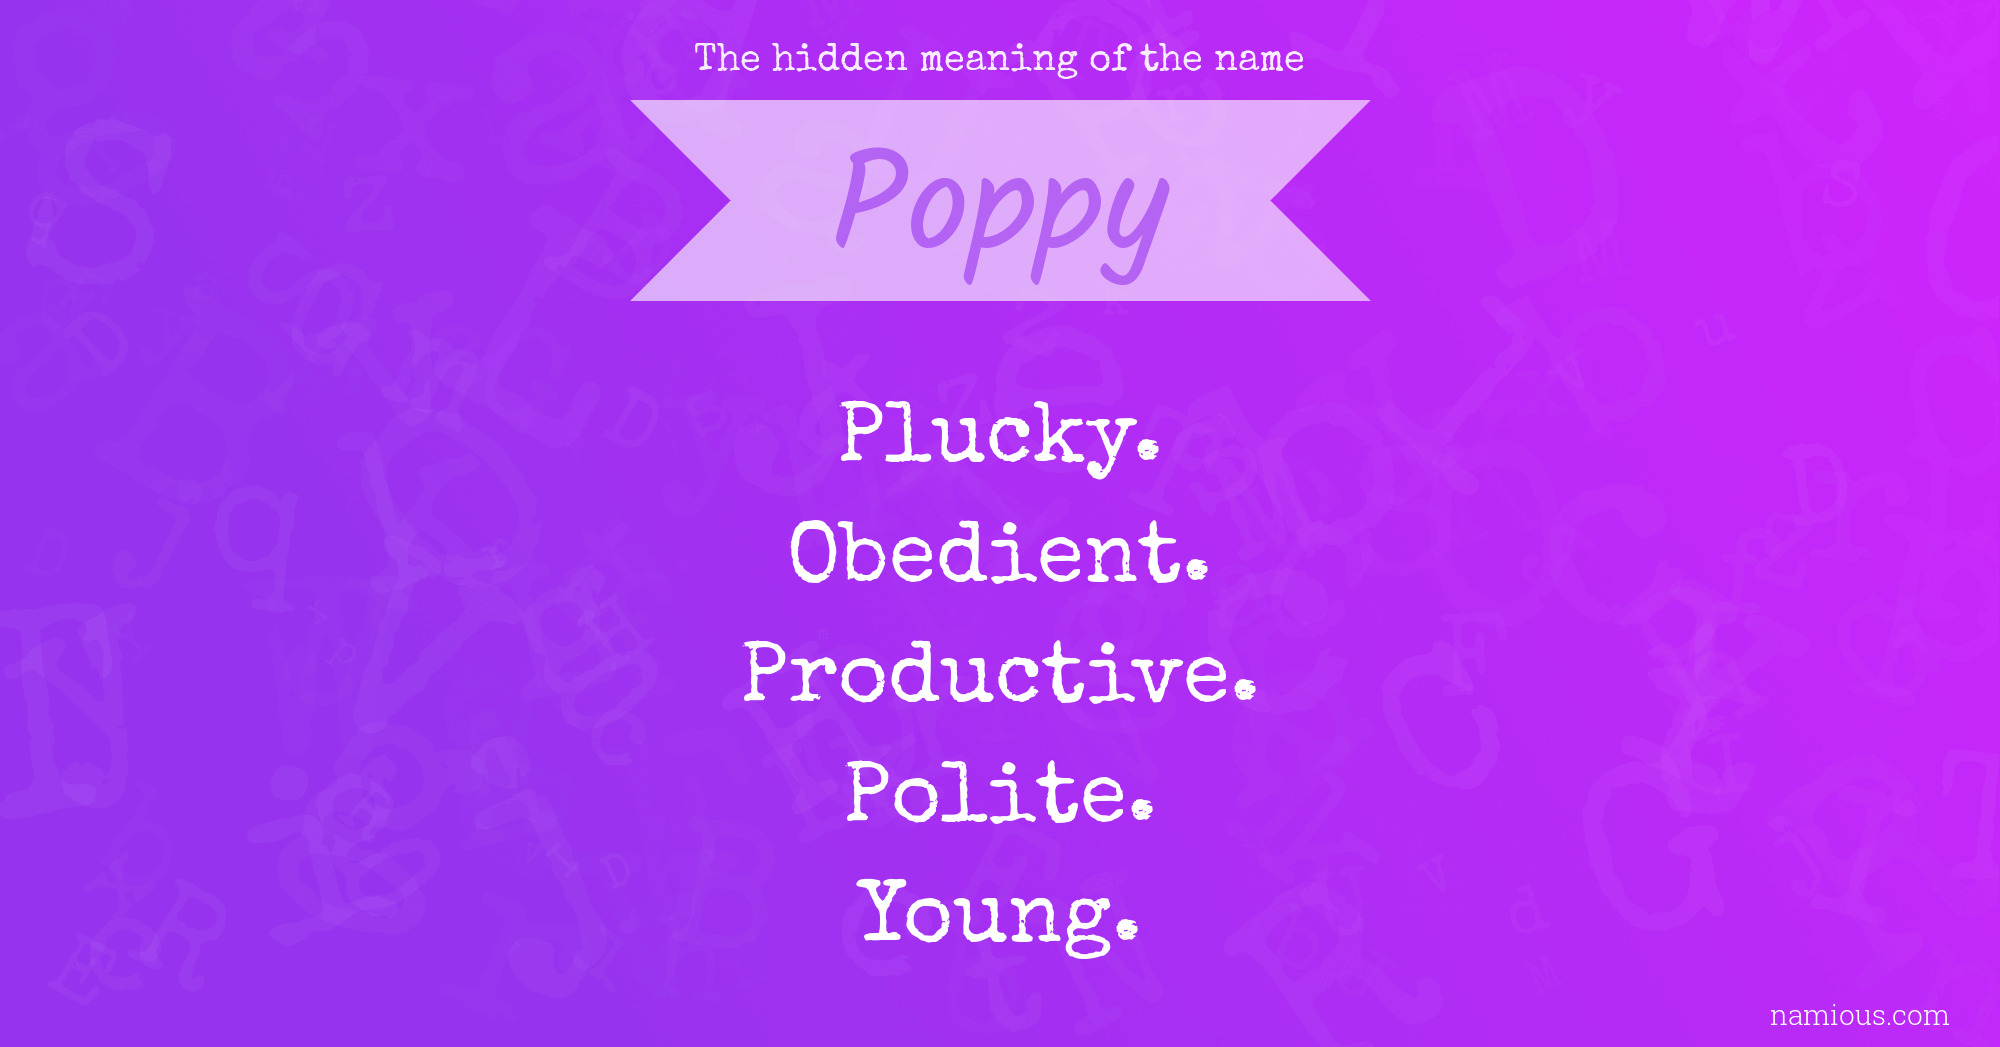 The hidden meaning of the name Poppy